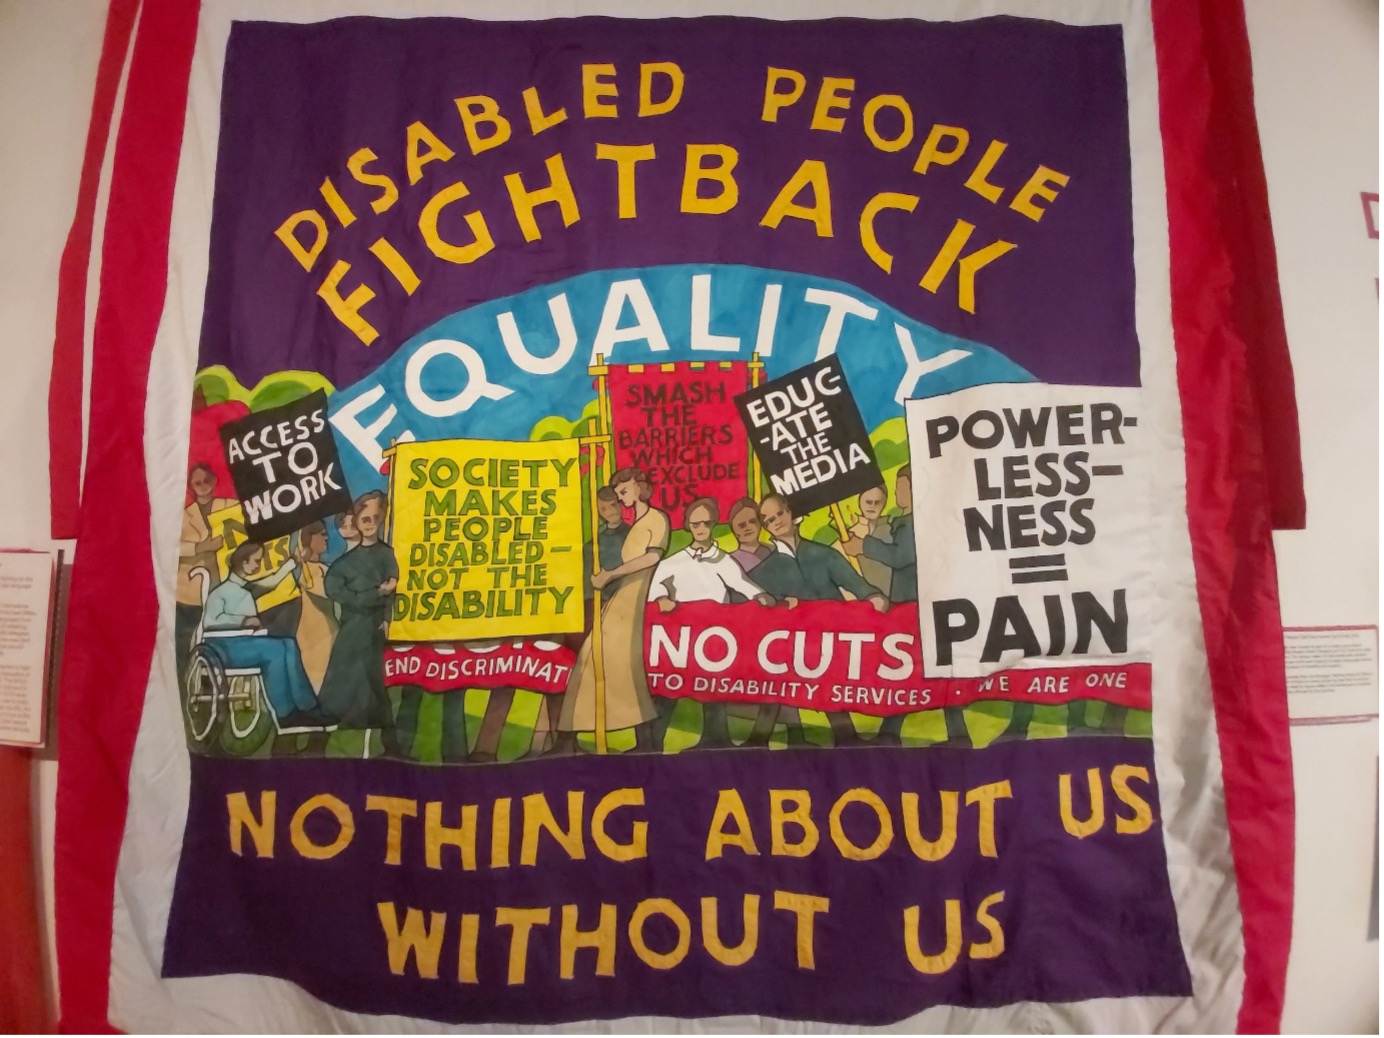 An image of a material with an image of a protest on it with text 'disabled people fight back' 'equality' 'powerless-ness = pain' 'nothing about us without us'